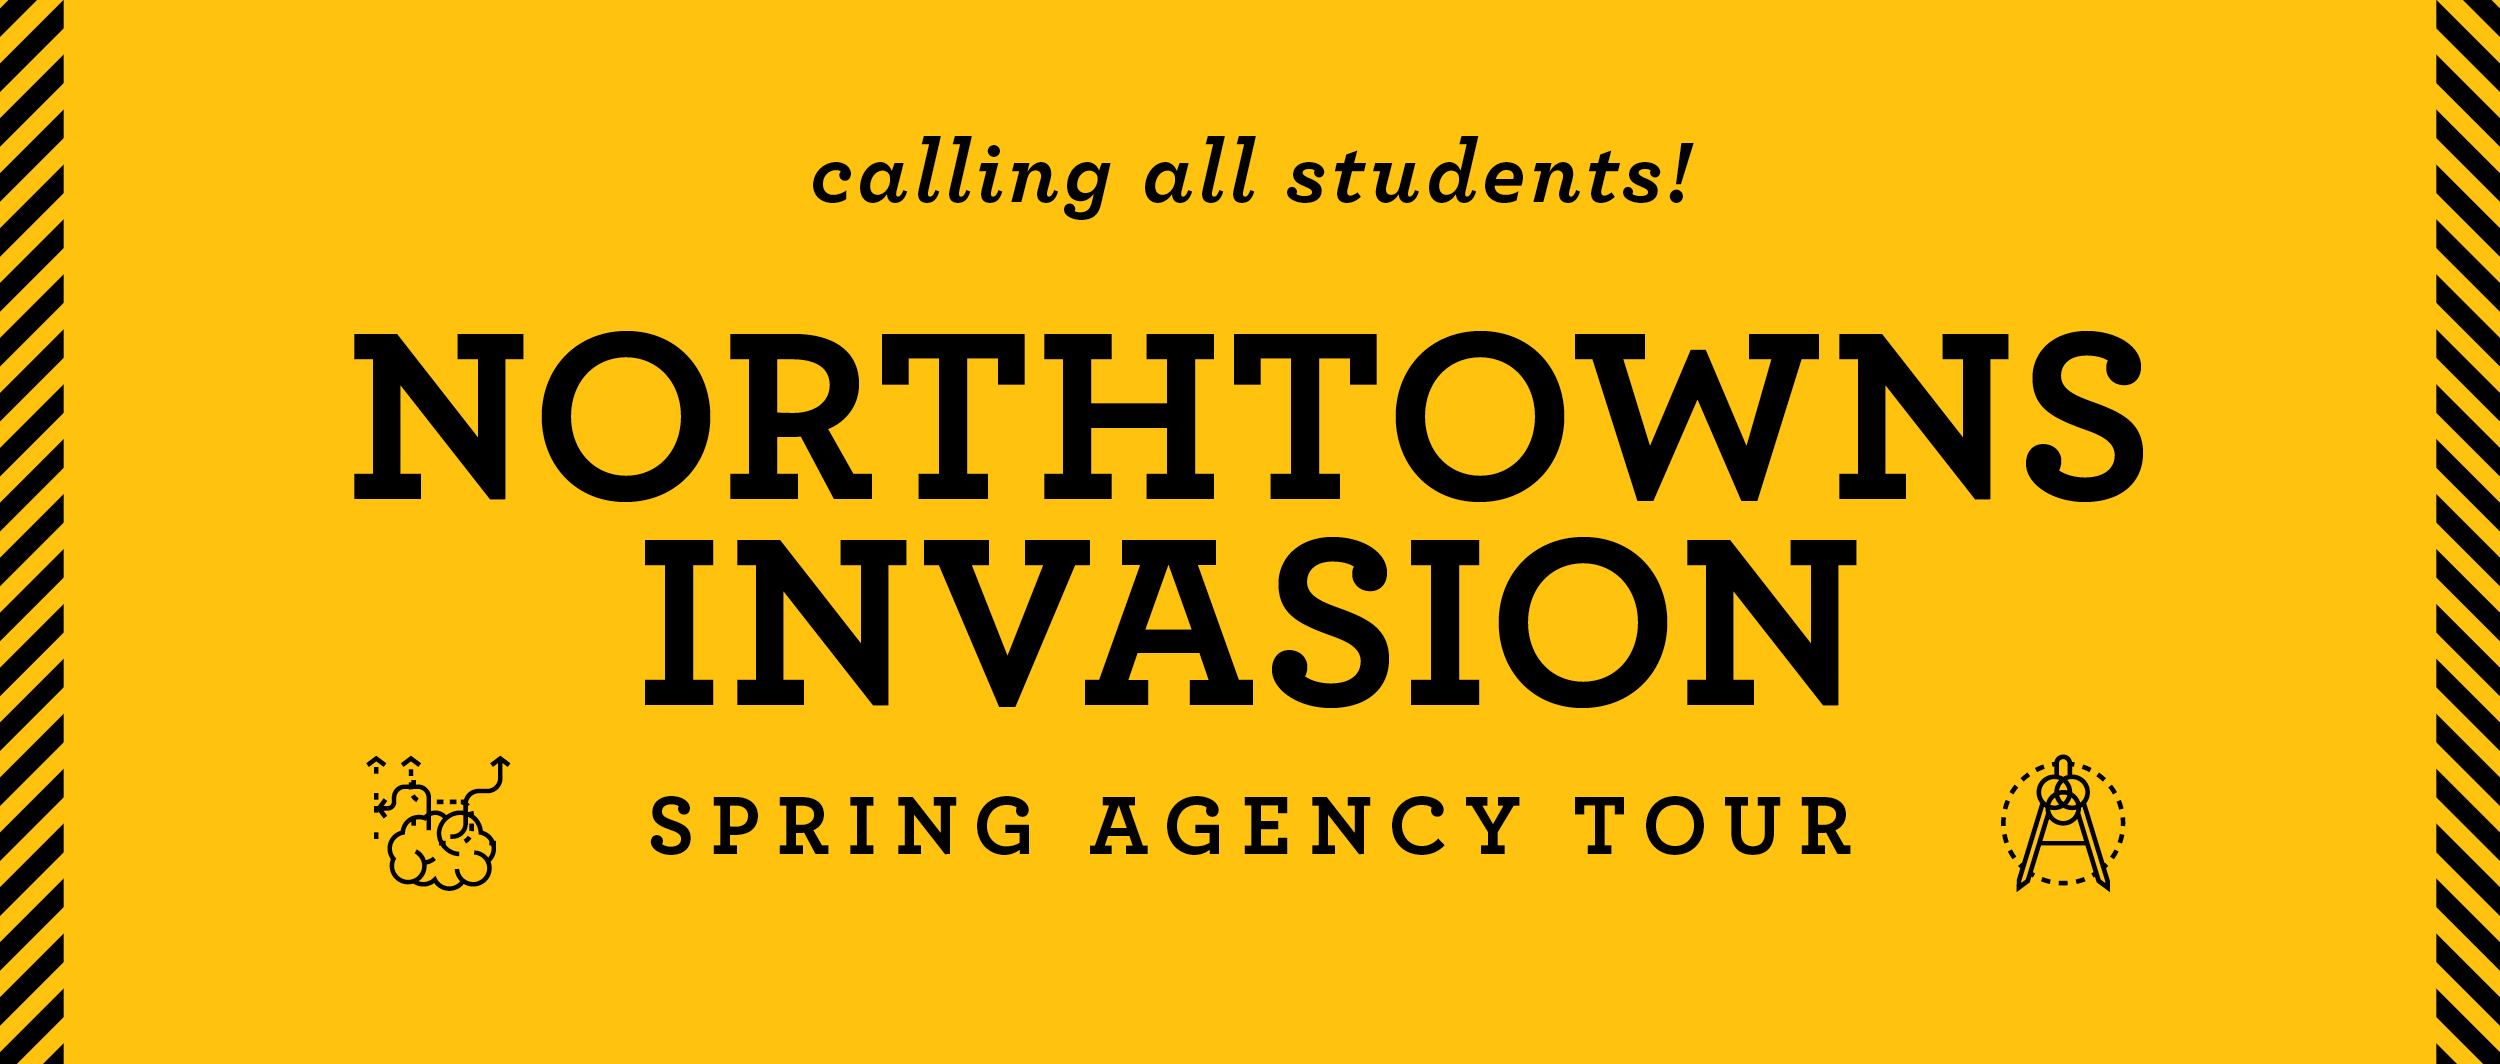 Student Agency Tour: Northtowns Invasion